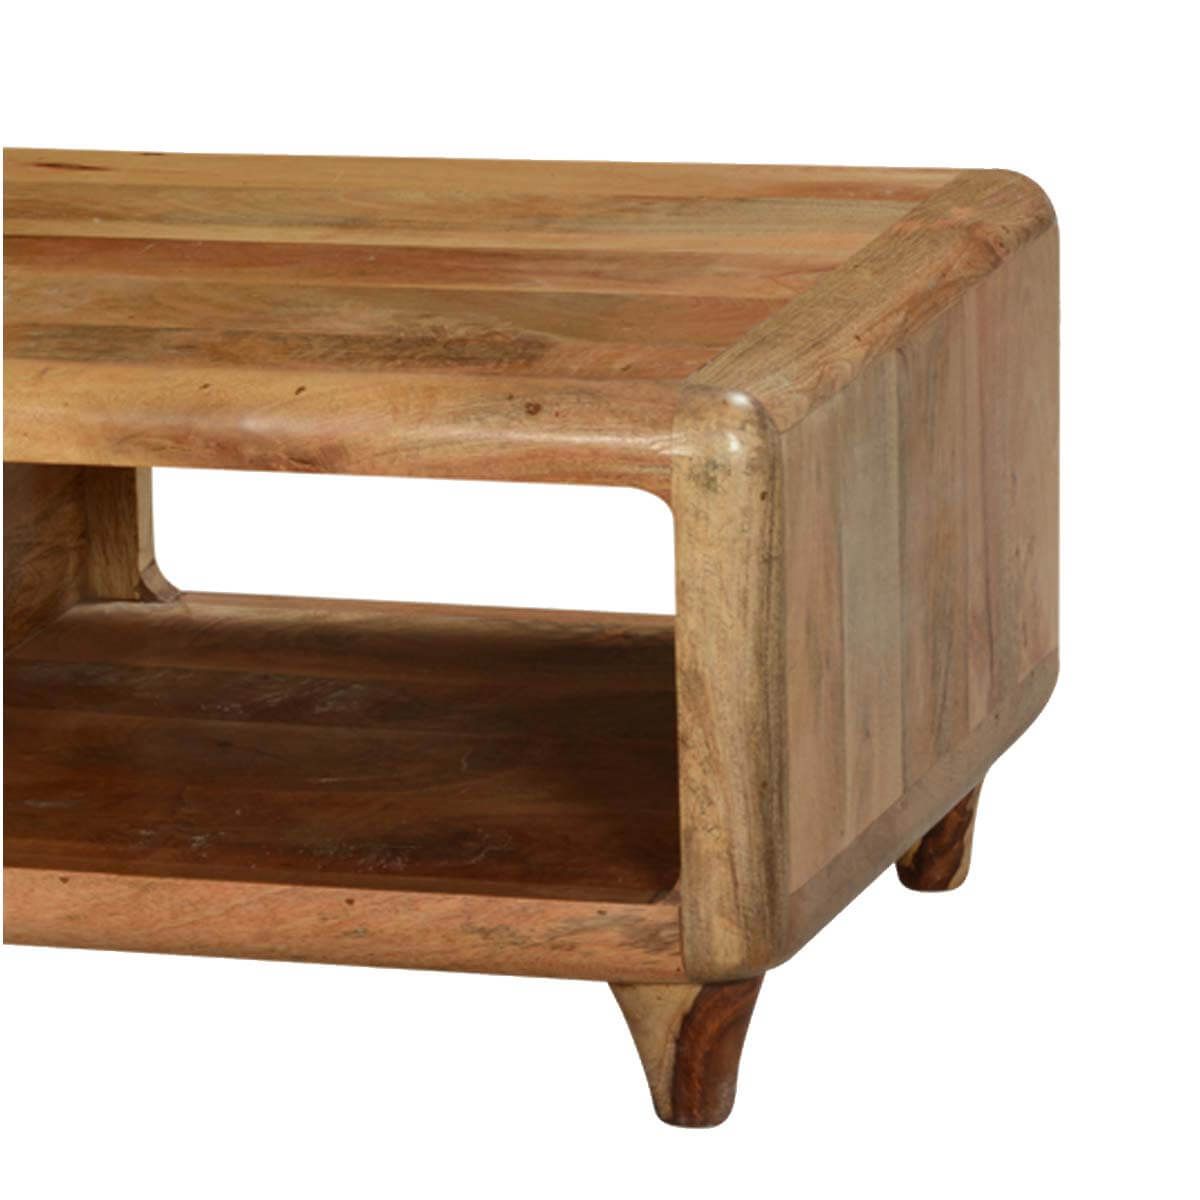 60's Natural Mango Wood Rounded Corners Tv Console Media Inside Tv Stands With Rounded Corners (View 15 of 15)